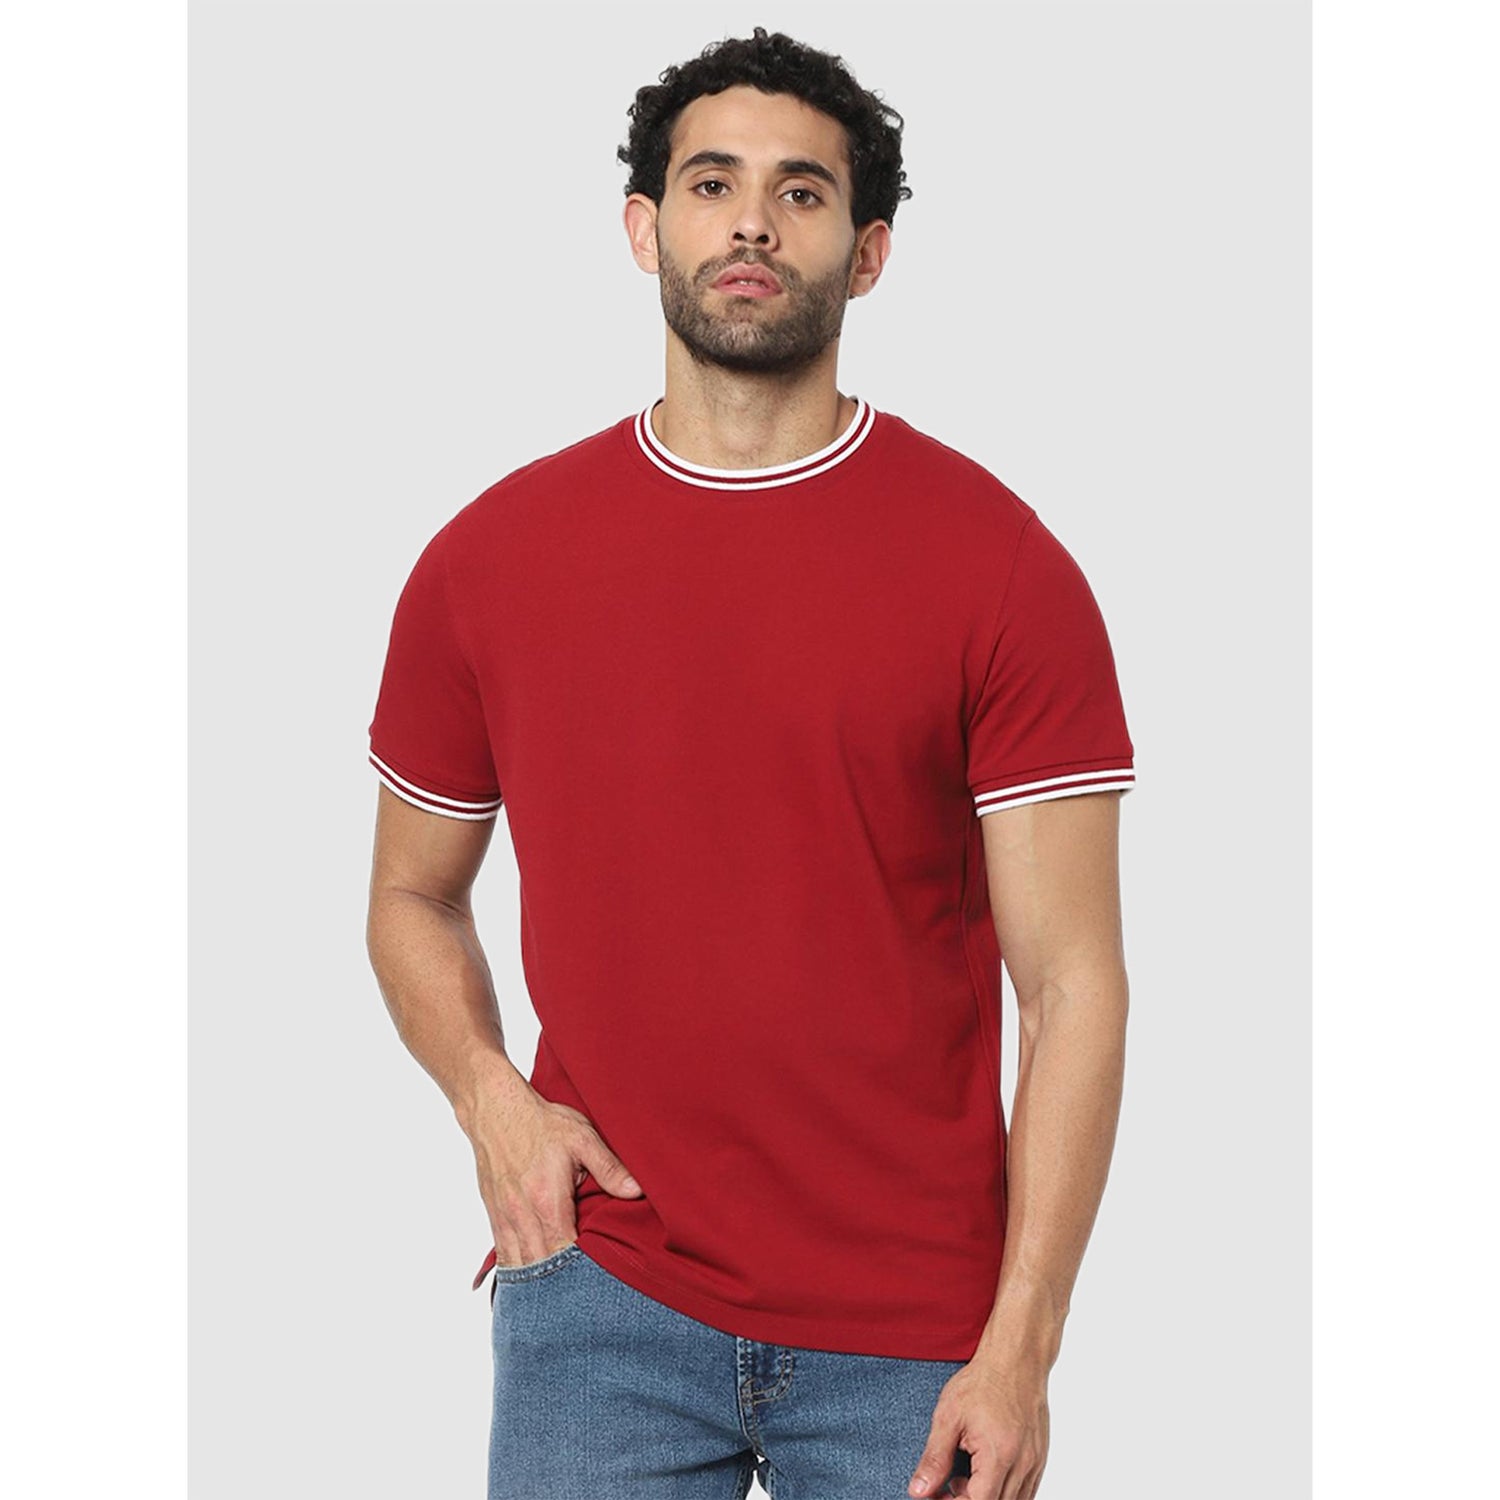 Red and White Solid Regular Fit Cotton T-shirt (BEPIQUO)